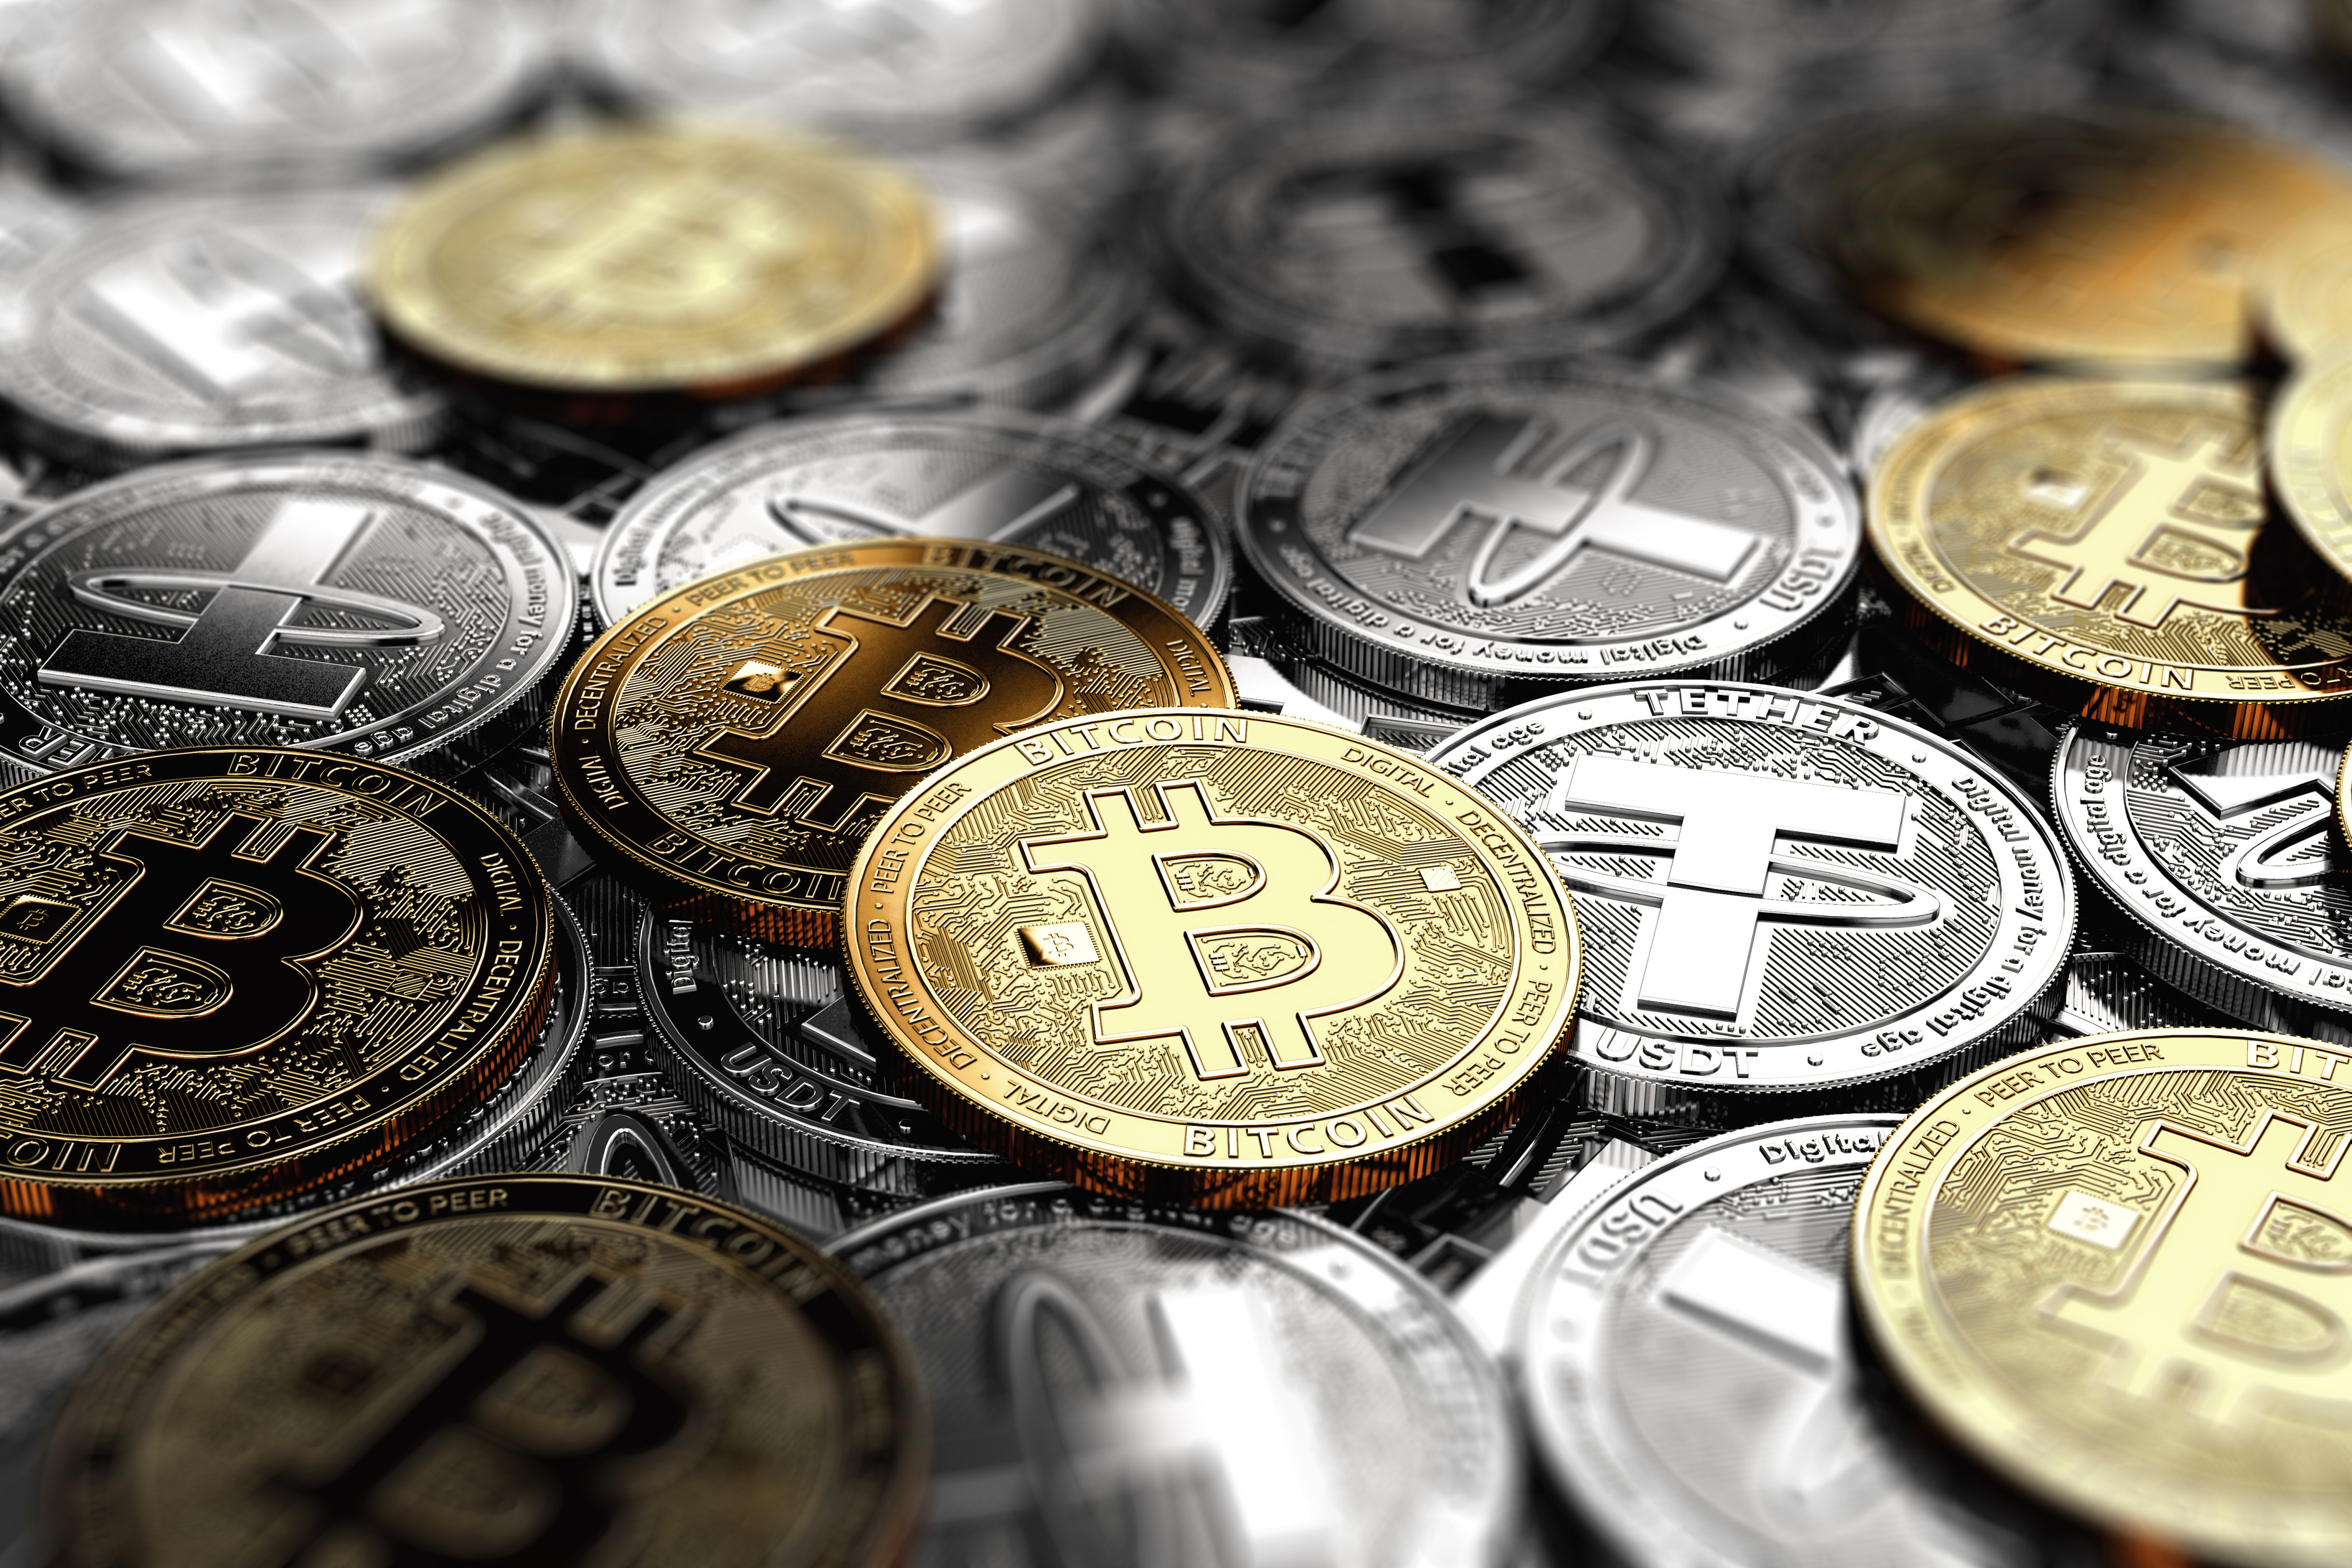 Representations of bitcoin and tether tokens in a 3D rendering. Hong Kong’s proposed stablecoin regulation opens the question of whether the world’s largest issuer of such tokens, Tether, will seek a licence in the city where it was founded. Photo: Shutterstock